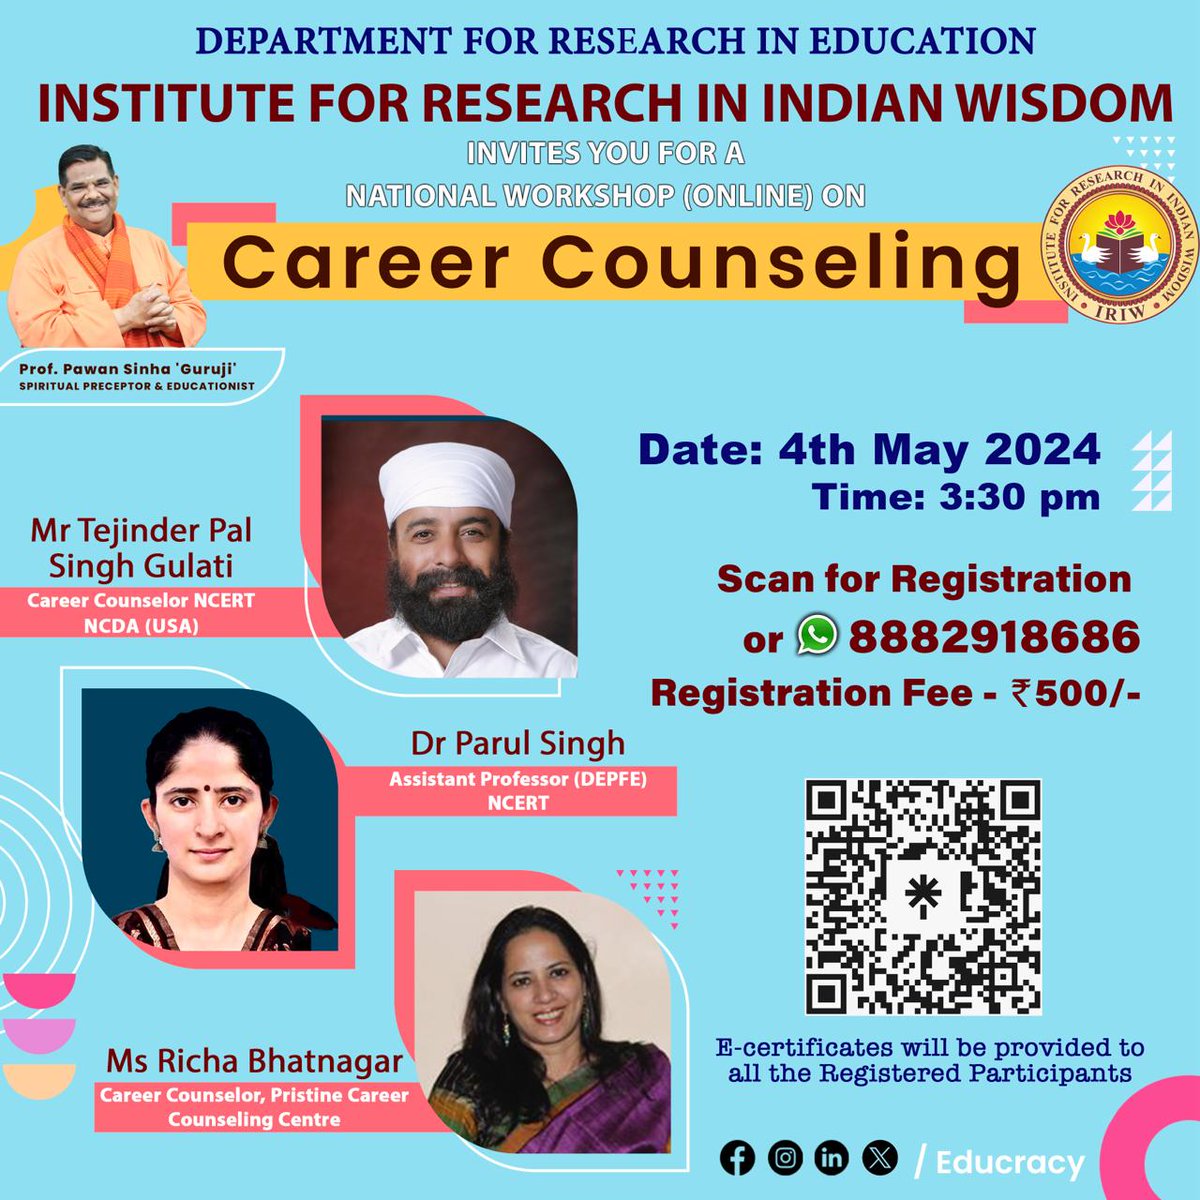 Choose the best future for yourself by stepping into a world of appropriate career guidance on May 4th, 2024, as the Dept. of Research in Education (DRE) invites you to a workshop on Career Counseling, curated specifically for teachers, parents & students. t.ly/sQK9m